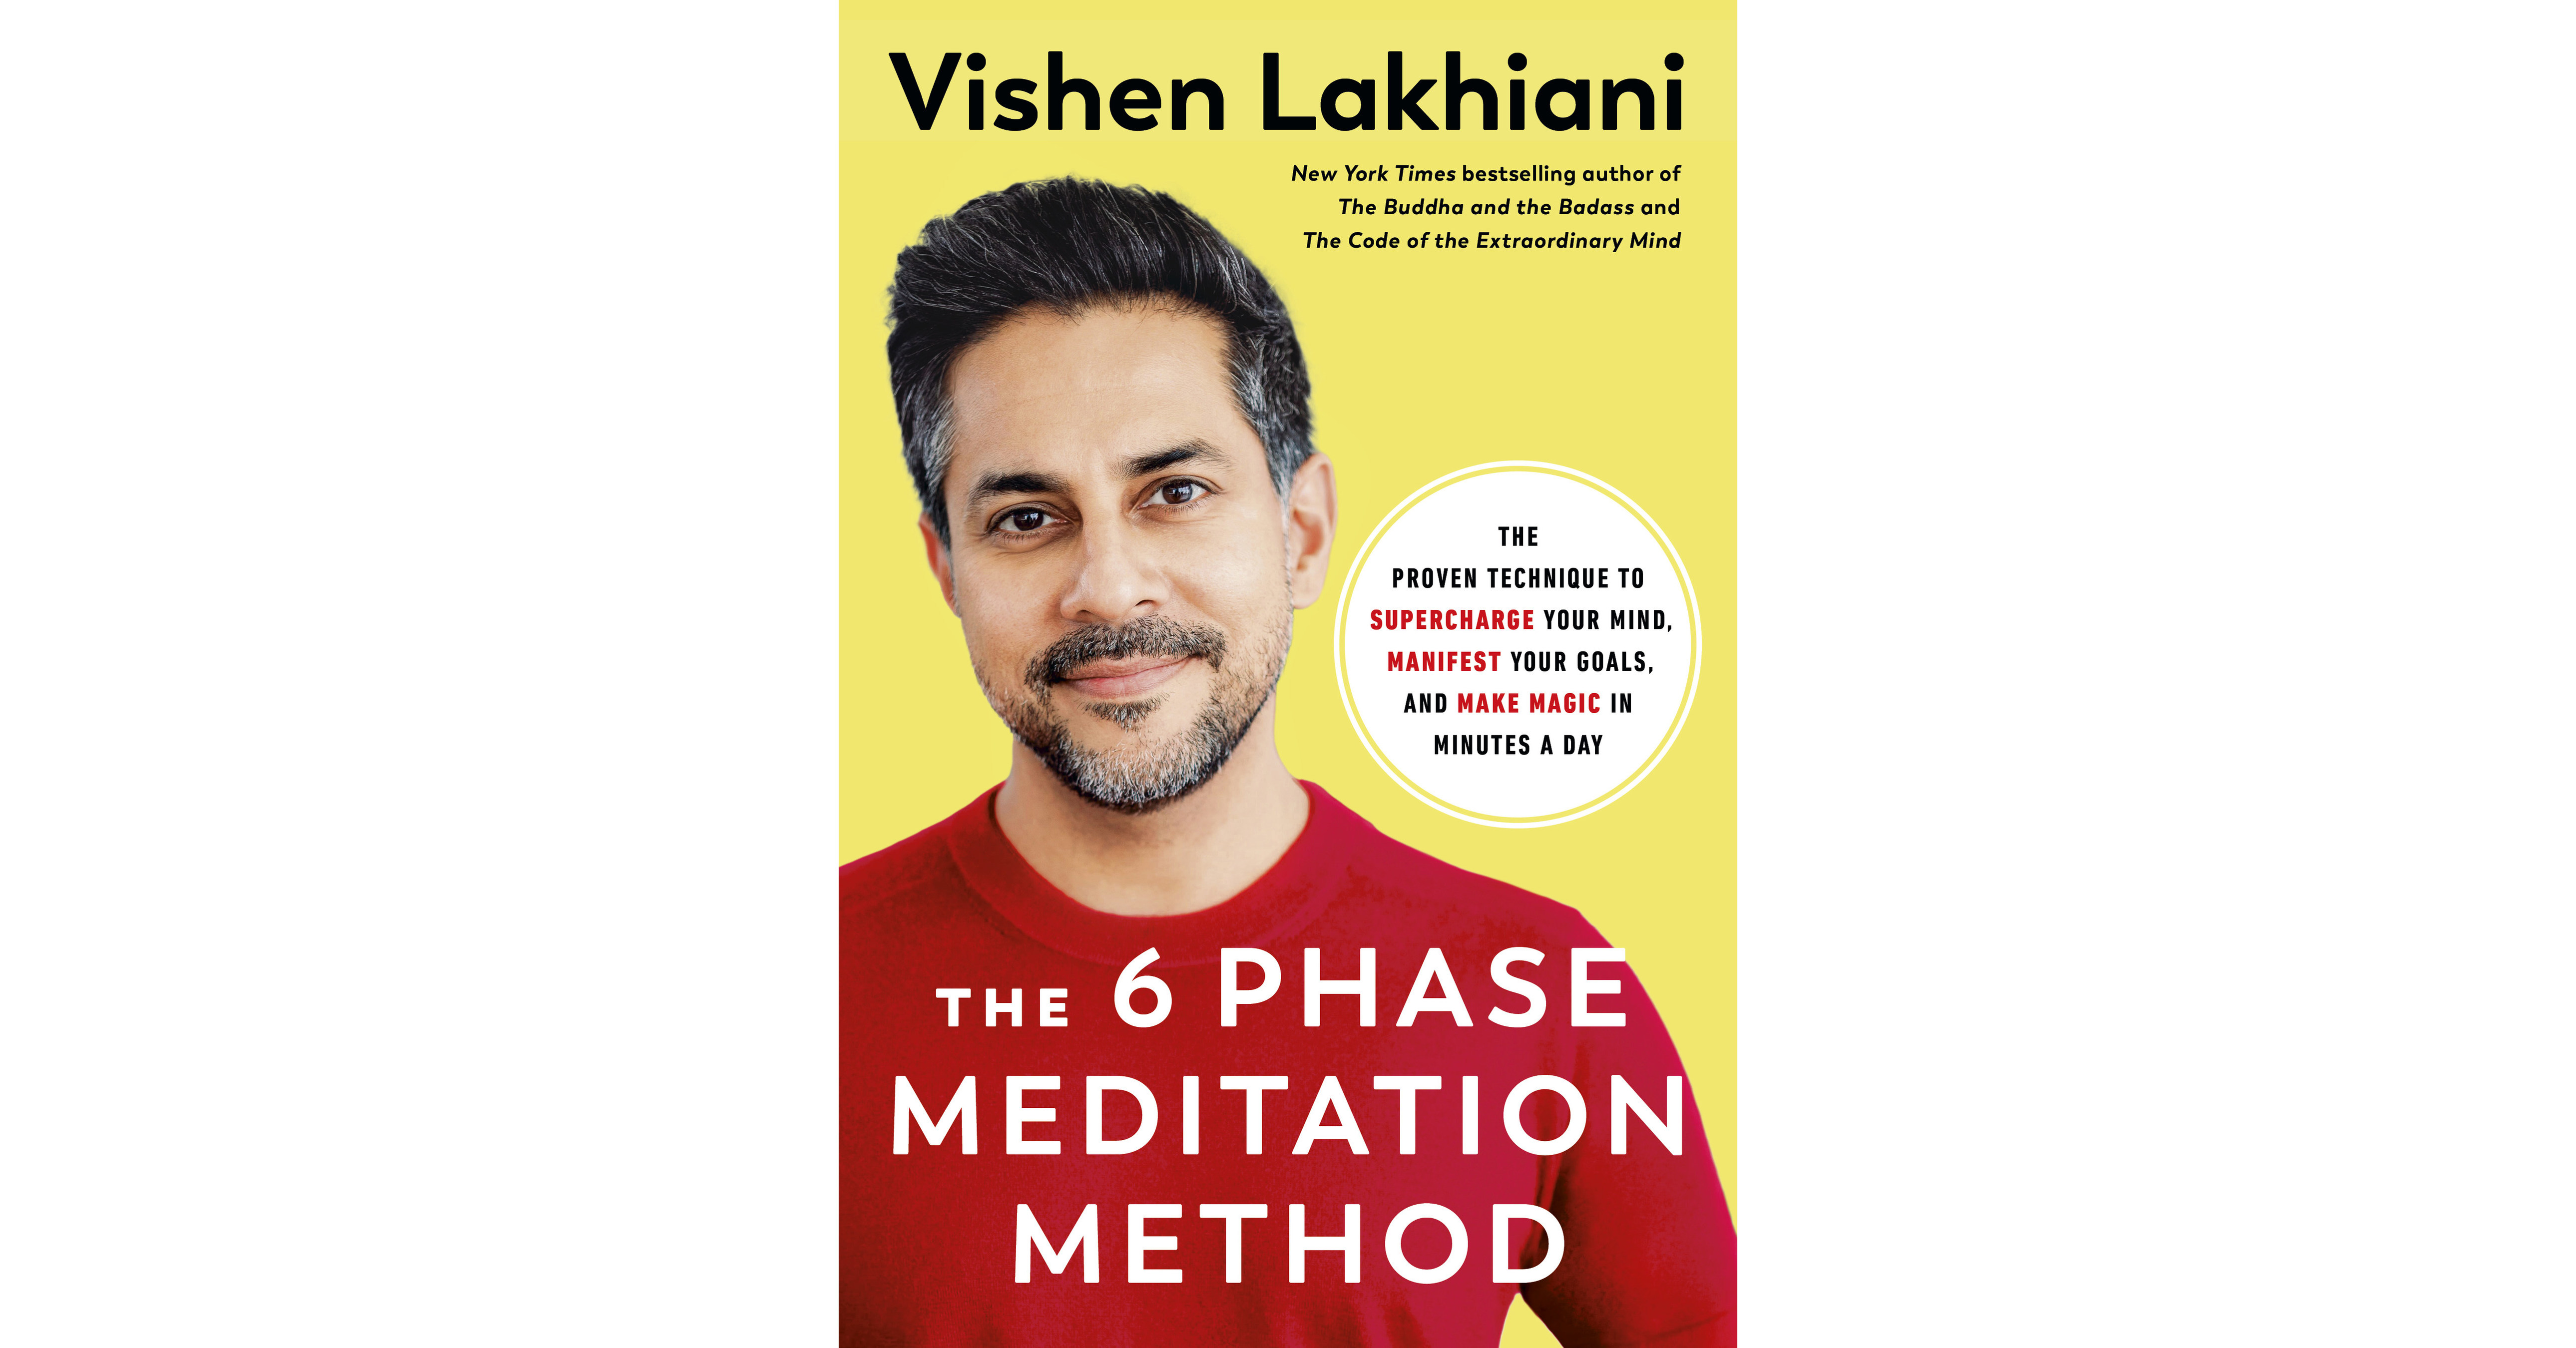 Mindvalley Founder and Bestselling Author Vishen Announces Groundbreaking Third Book, The 6 Phase Meditation Method, Out September 20